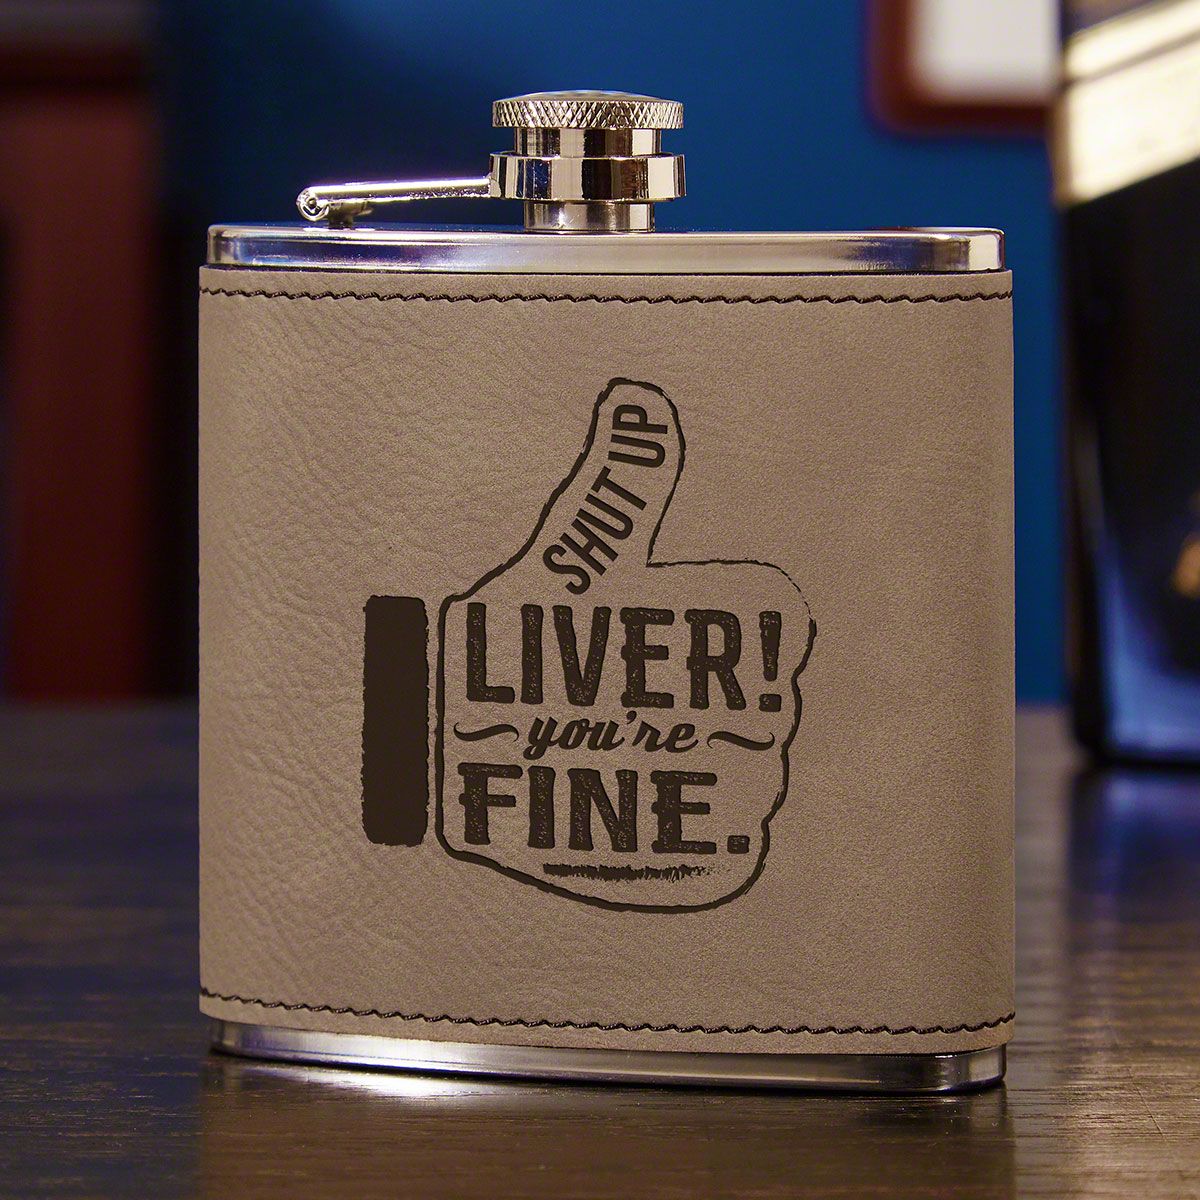 Personalized flask wrapped in gravel stone-colored faux leather make great gifts for him on valentine